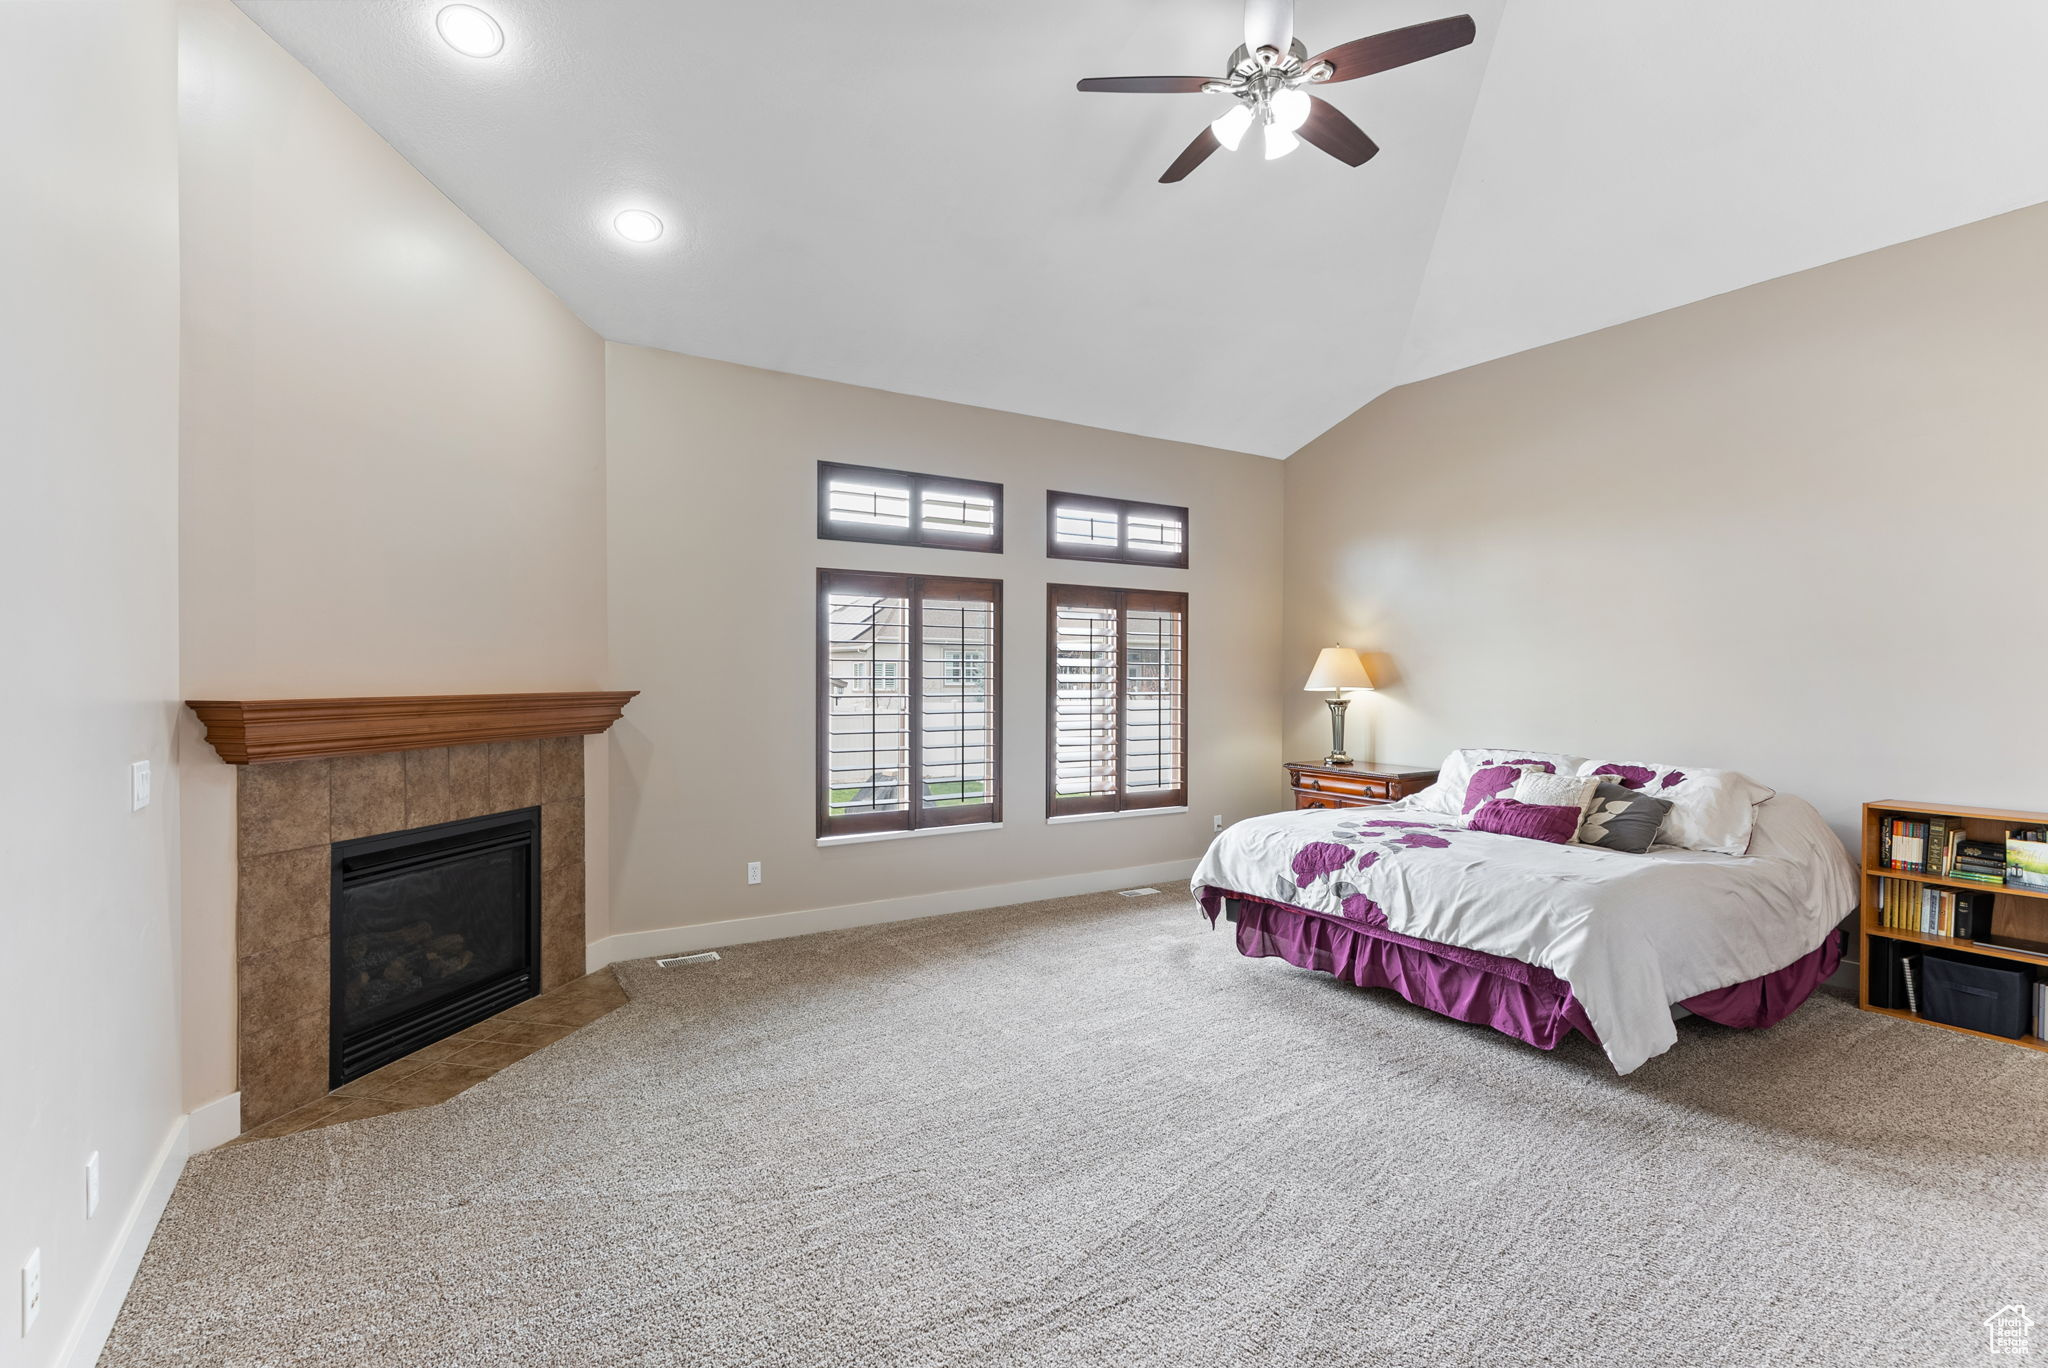 Carpeted bedroom featuring vaulted ceiling, ceiling fan, and a tile fireplace